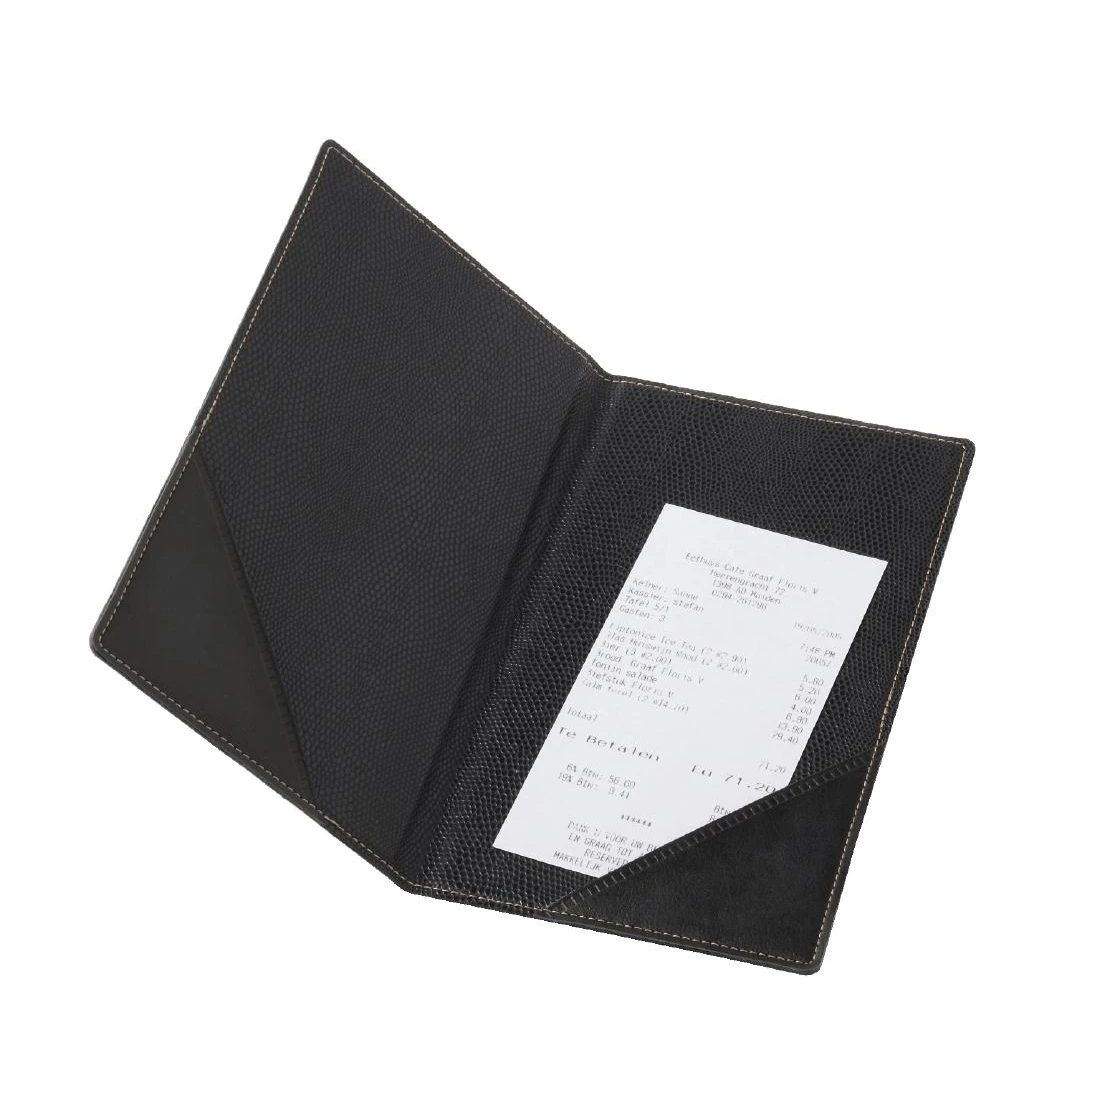 LEATHER LOOK WITH COMPLIMENTS FOLDER IDEAL FOR RESTAURANTS FOR THE BILL 